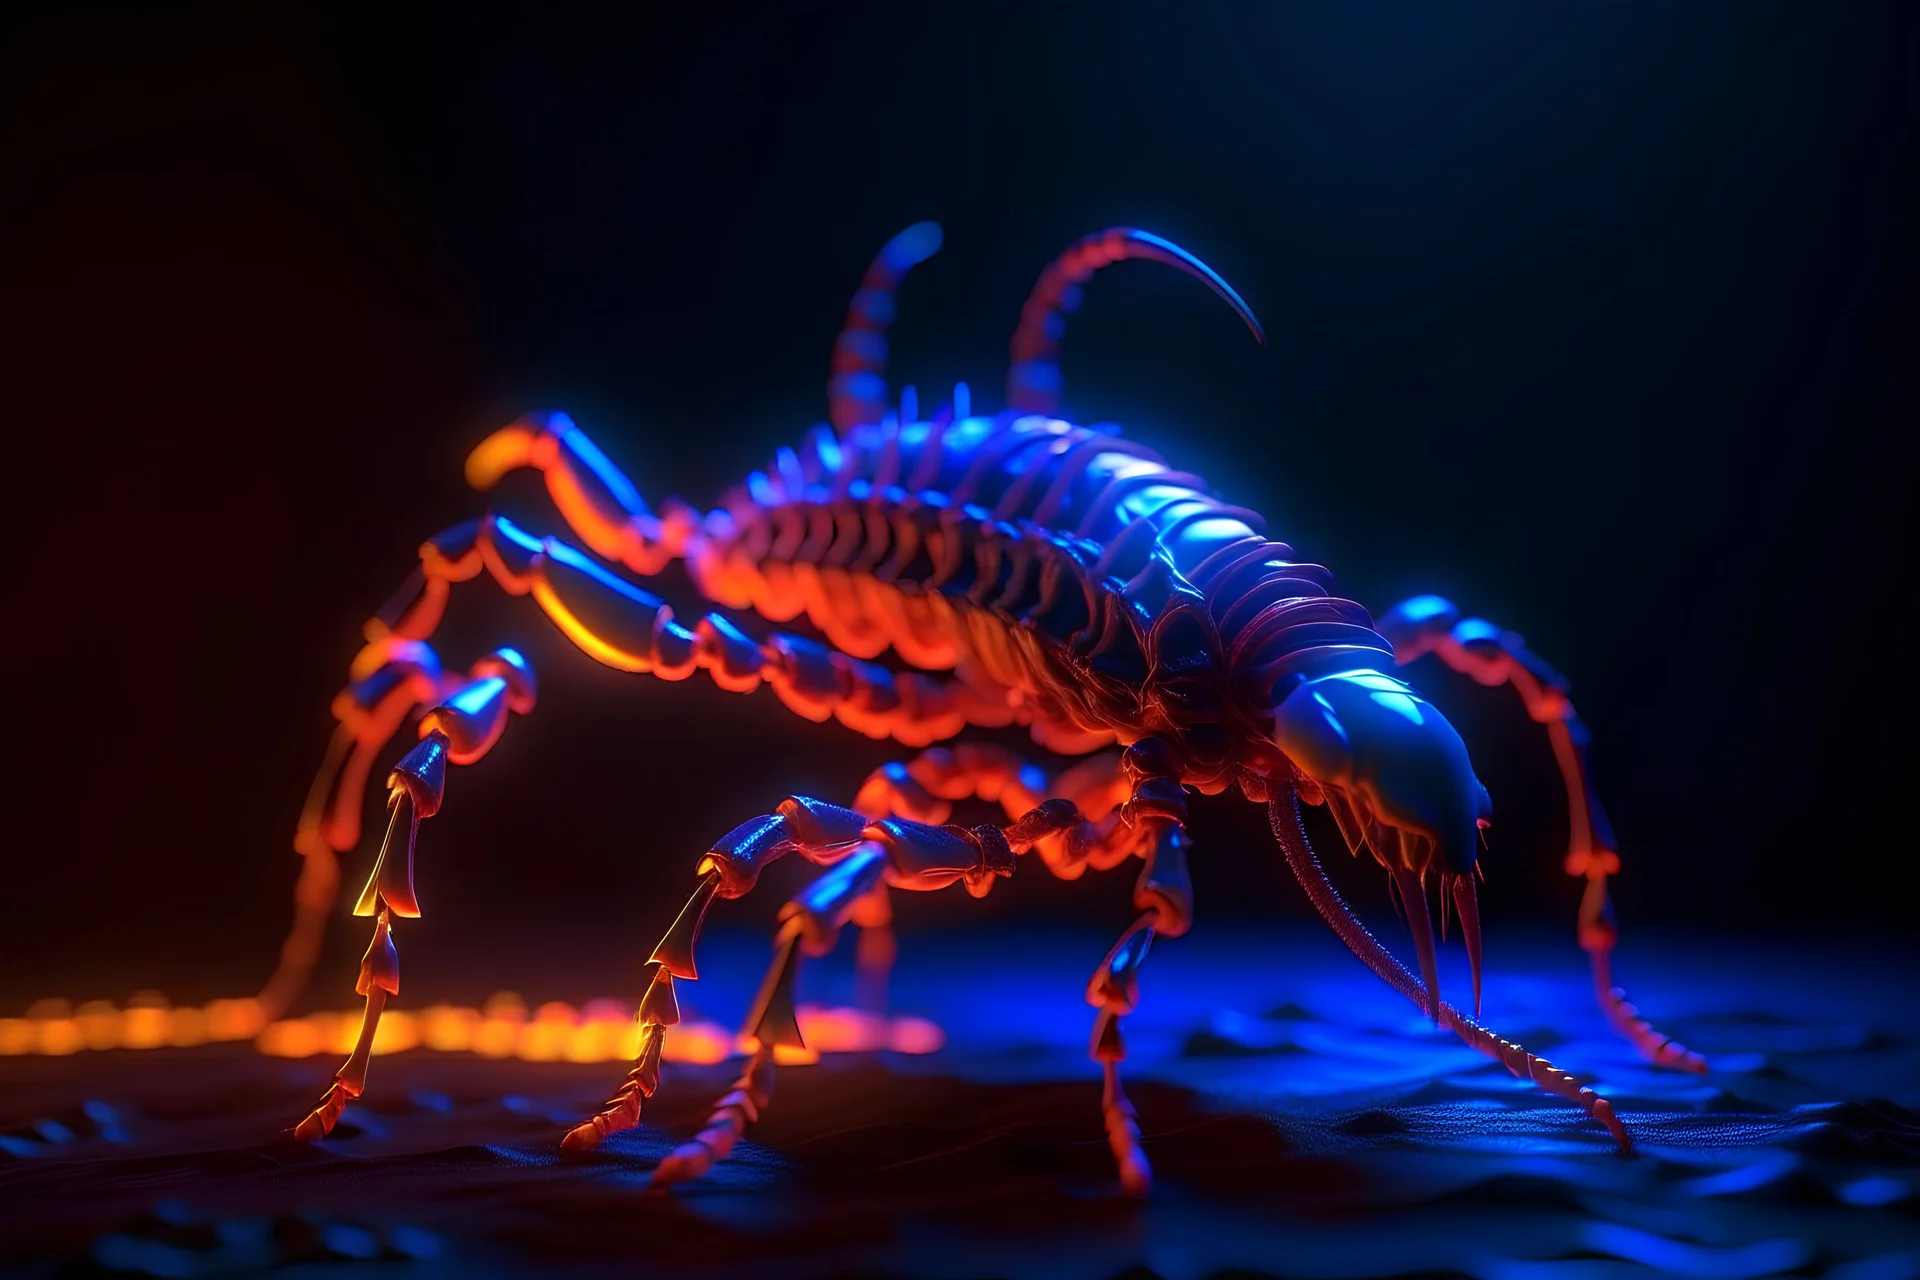 3D Print of an abstract insect alien, organic, neon infusion, spikes, vectorial, glowing, scorpion centipede, hybrid, orange and purple, Controlled Randomness, depth of vision, depth of field, sharpness 35%, Low Light Photography, Unreal Engine 5, OctaneRender, object illumination, ambient occlusion, metallic texture, static background, aesthetic, cyber, glossy, glow, bloom, surrealism, bones